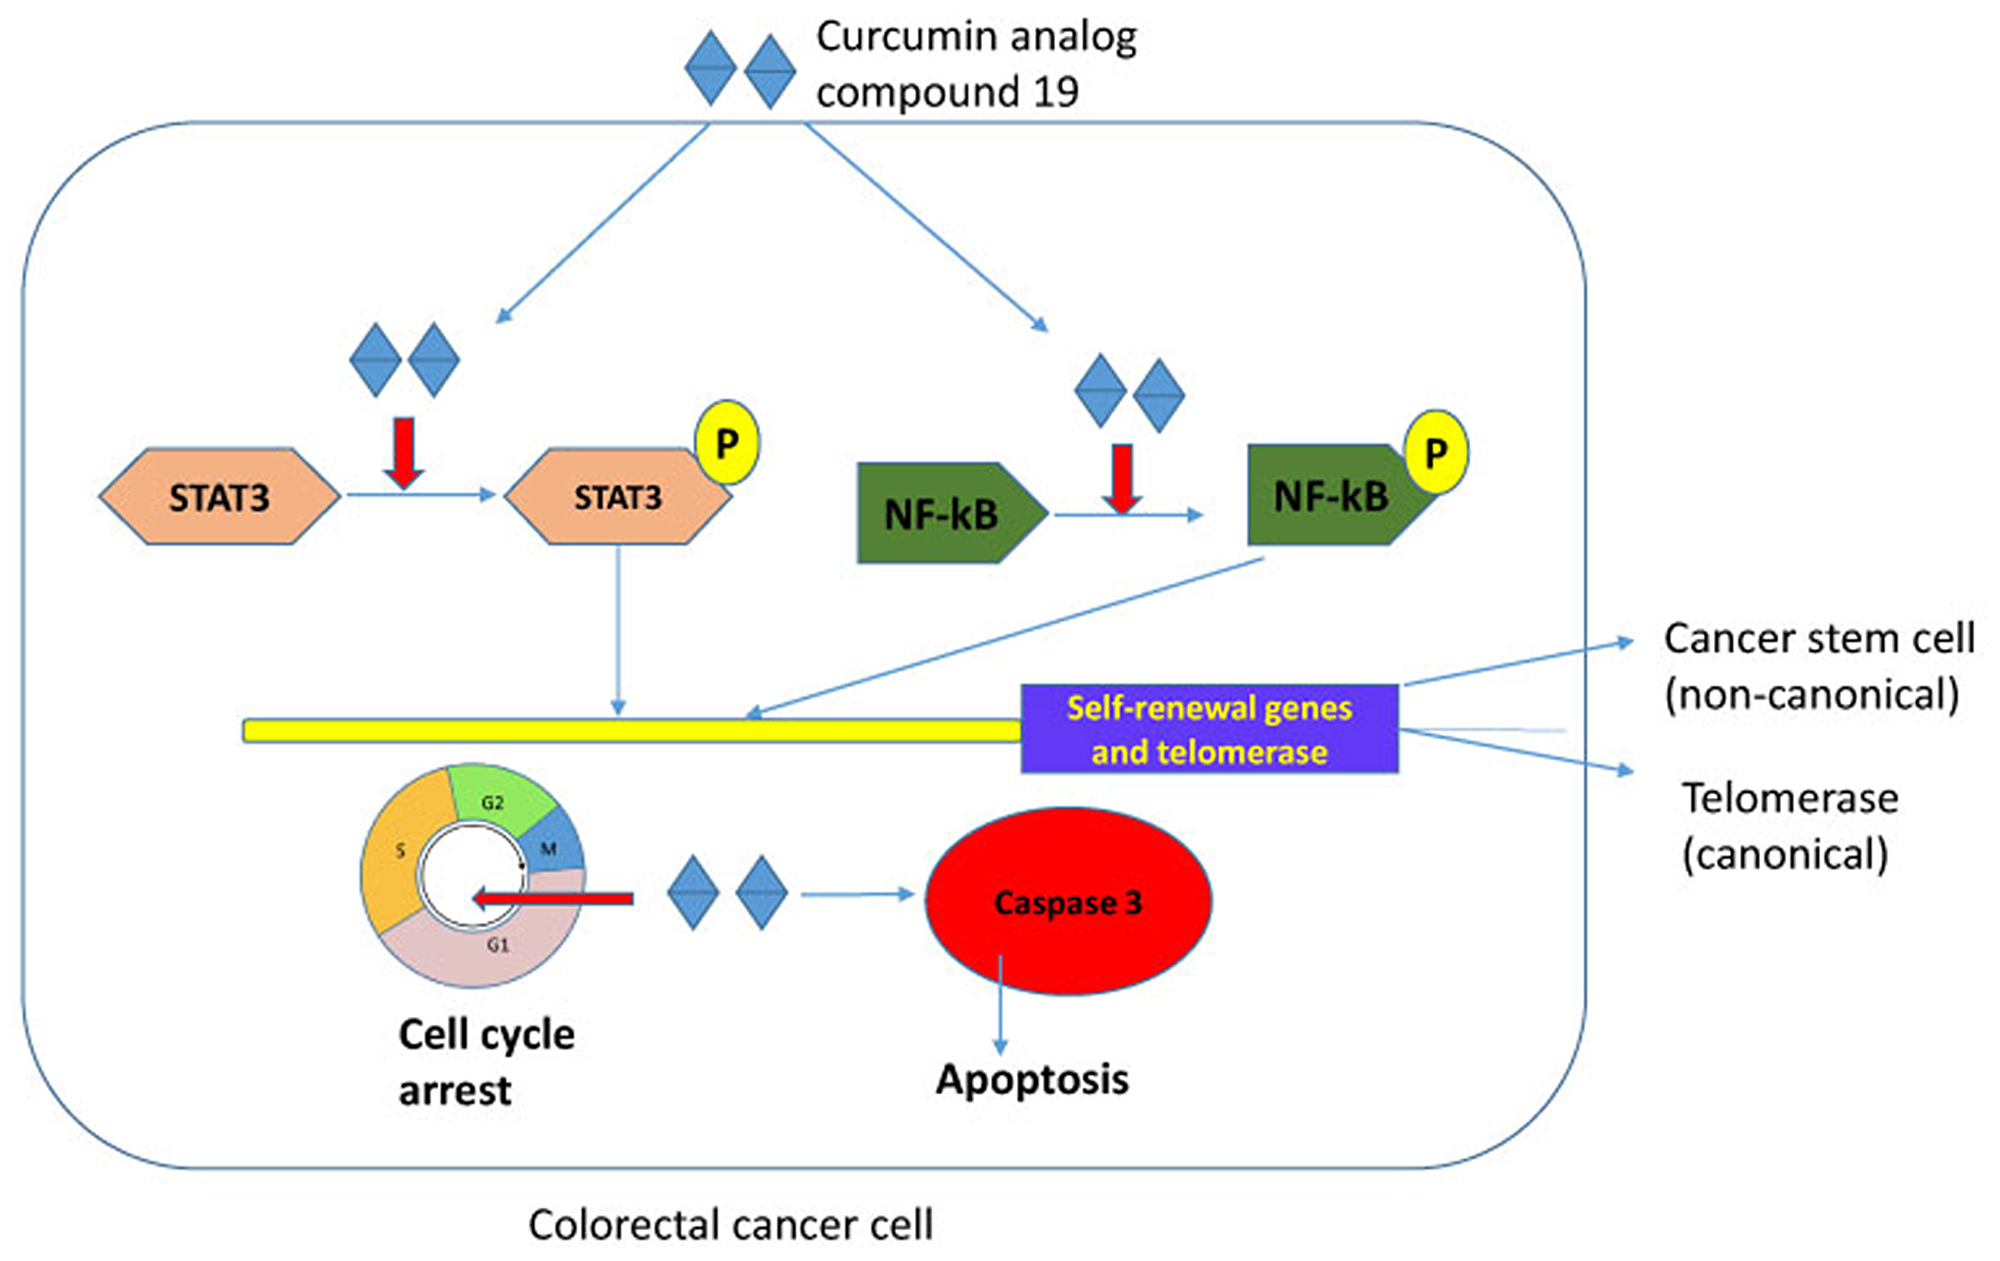 Schematic representation of compound 19 in colorectal cancer cells.